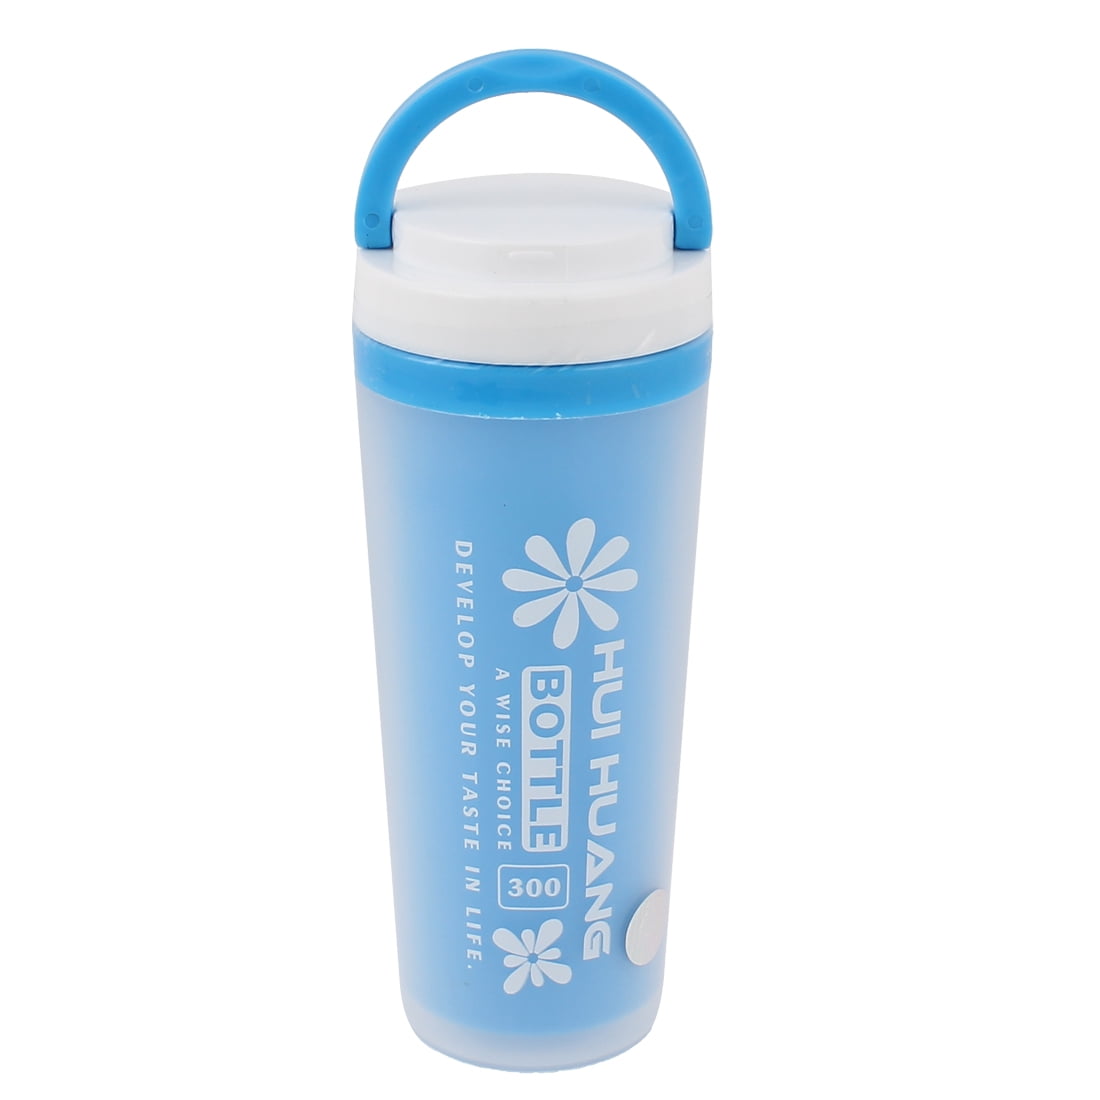 thermos flask home bargains